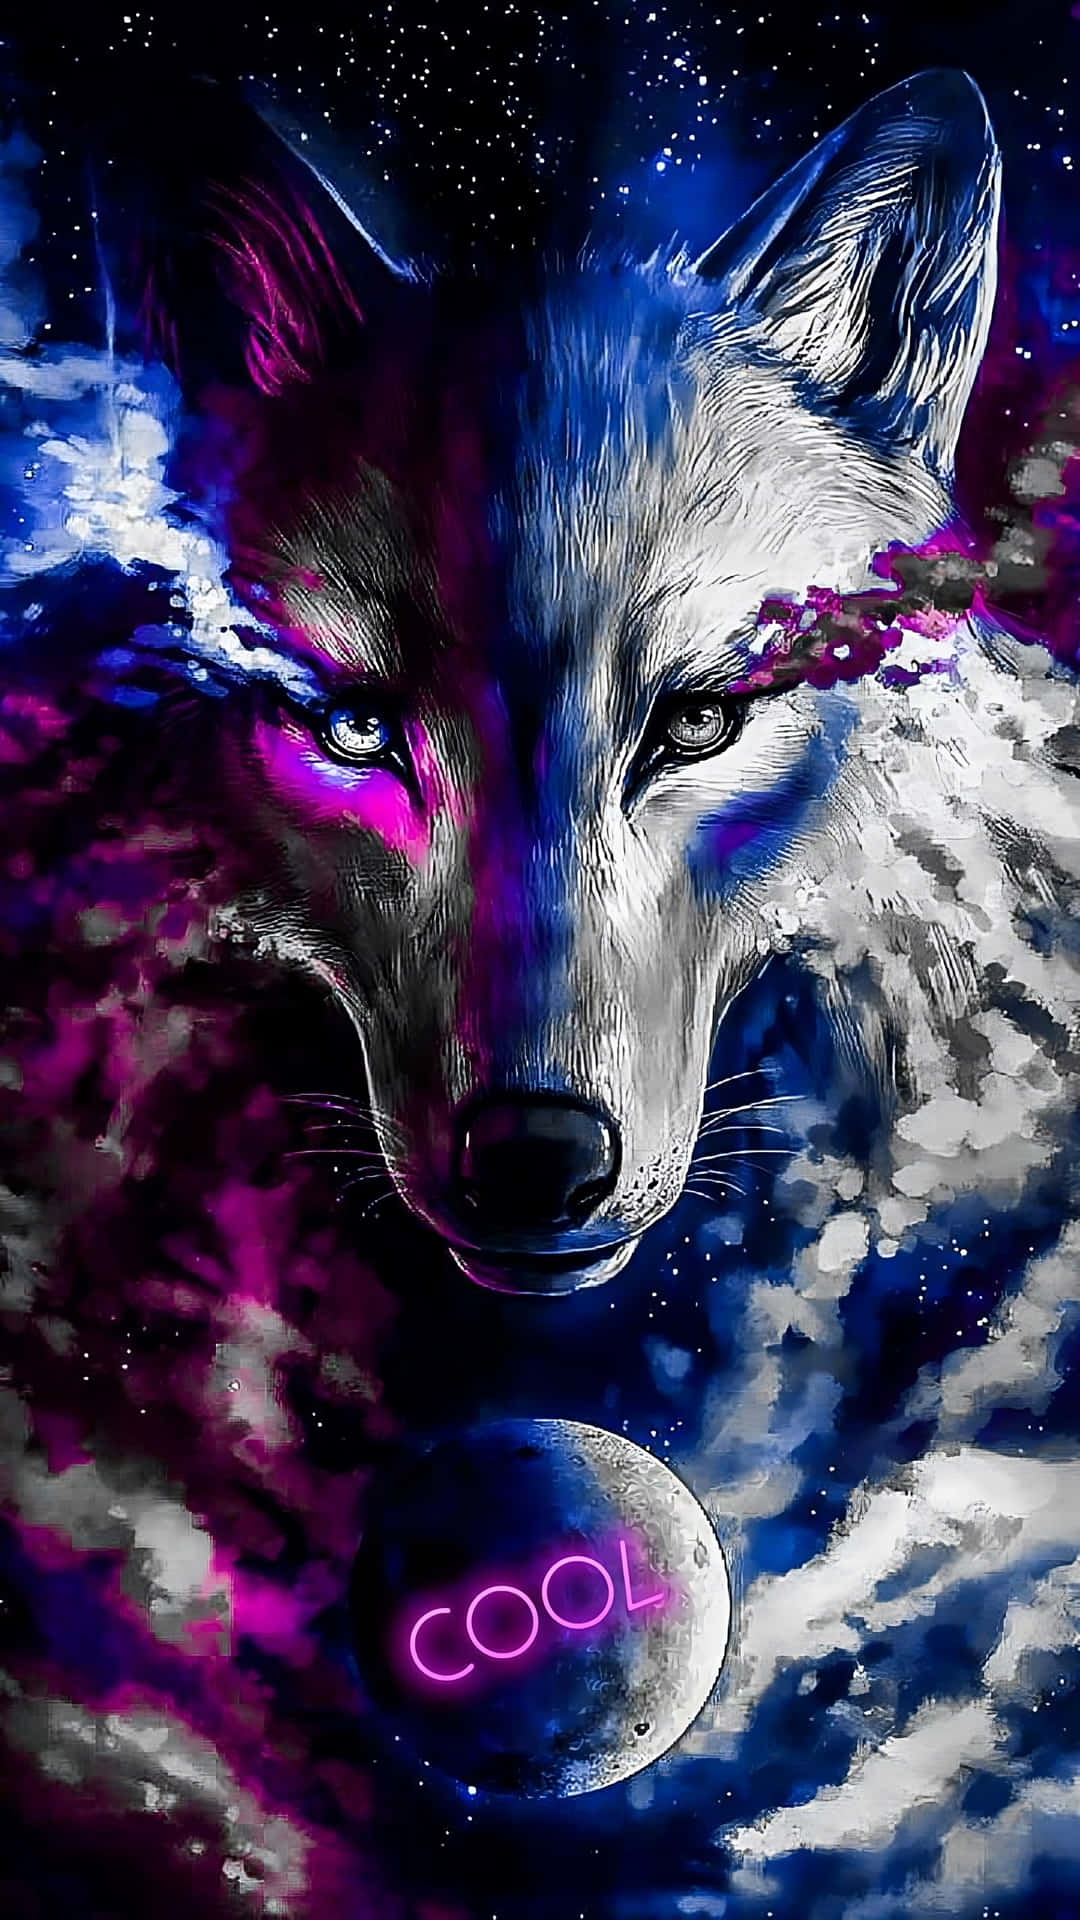 A magnificent lone wolf standing amidst a vividly illuminated forest. Wallpaper